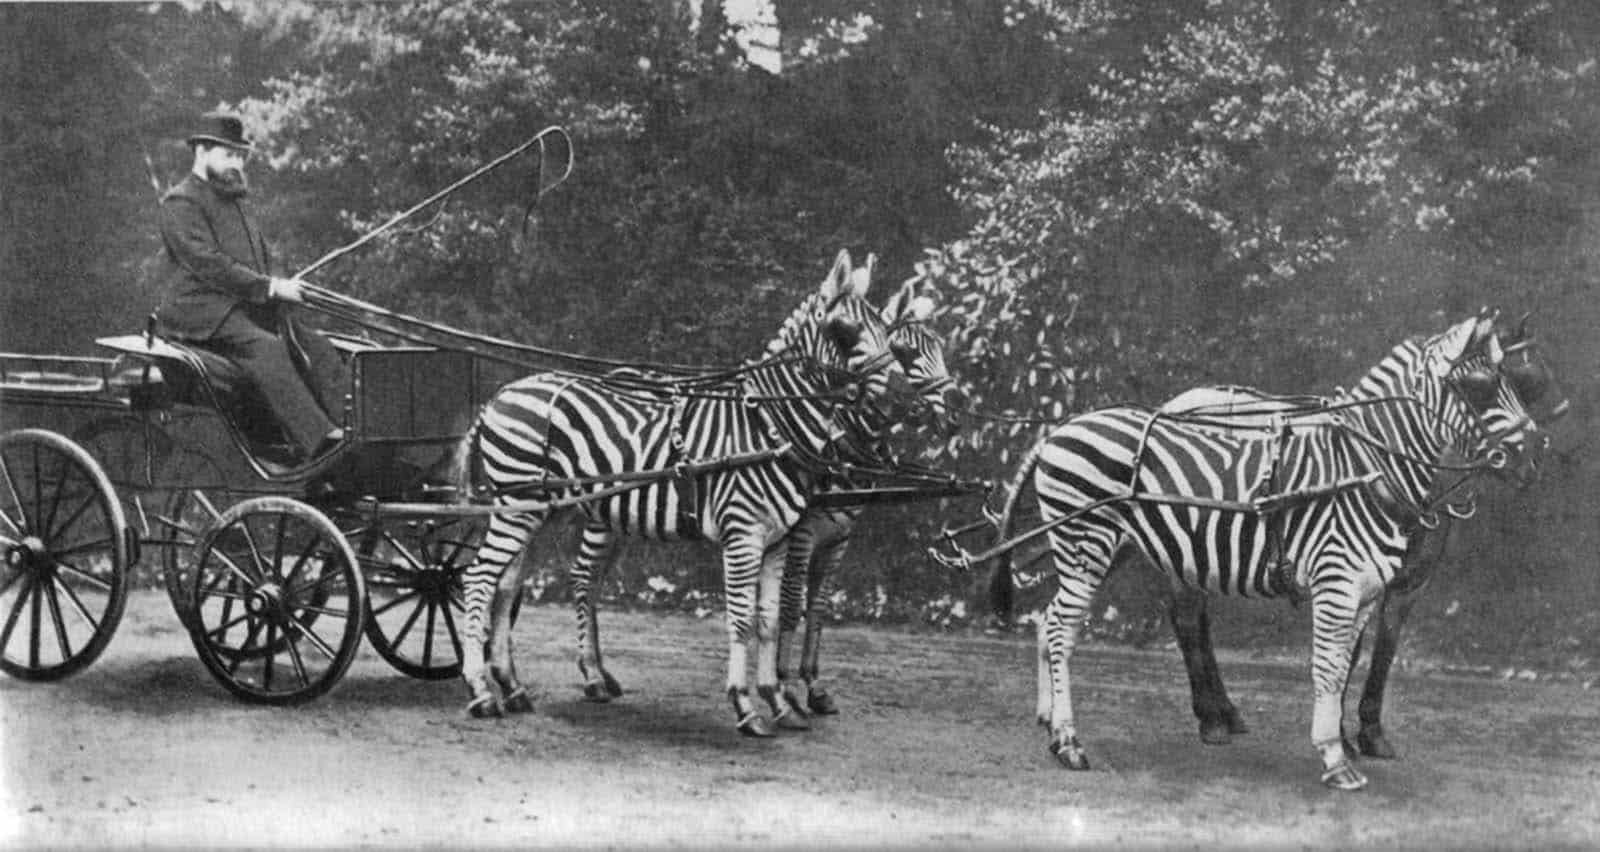 Why zebras were never domesticated